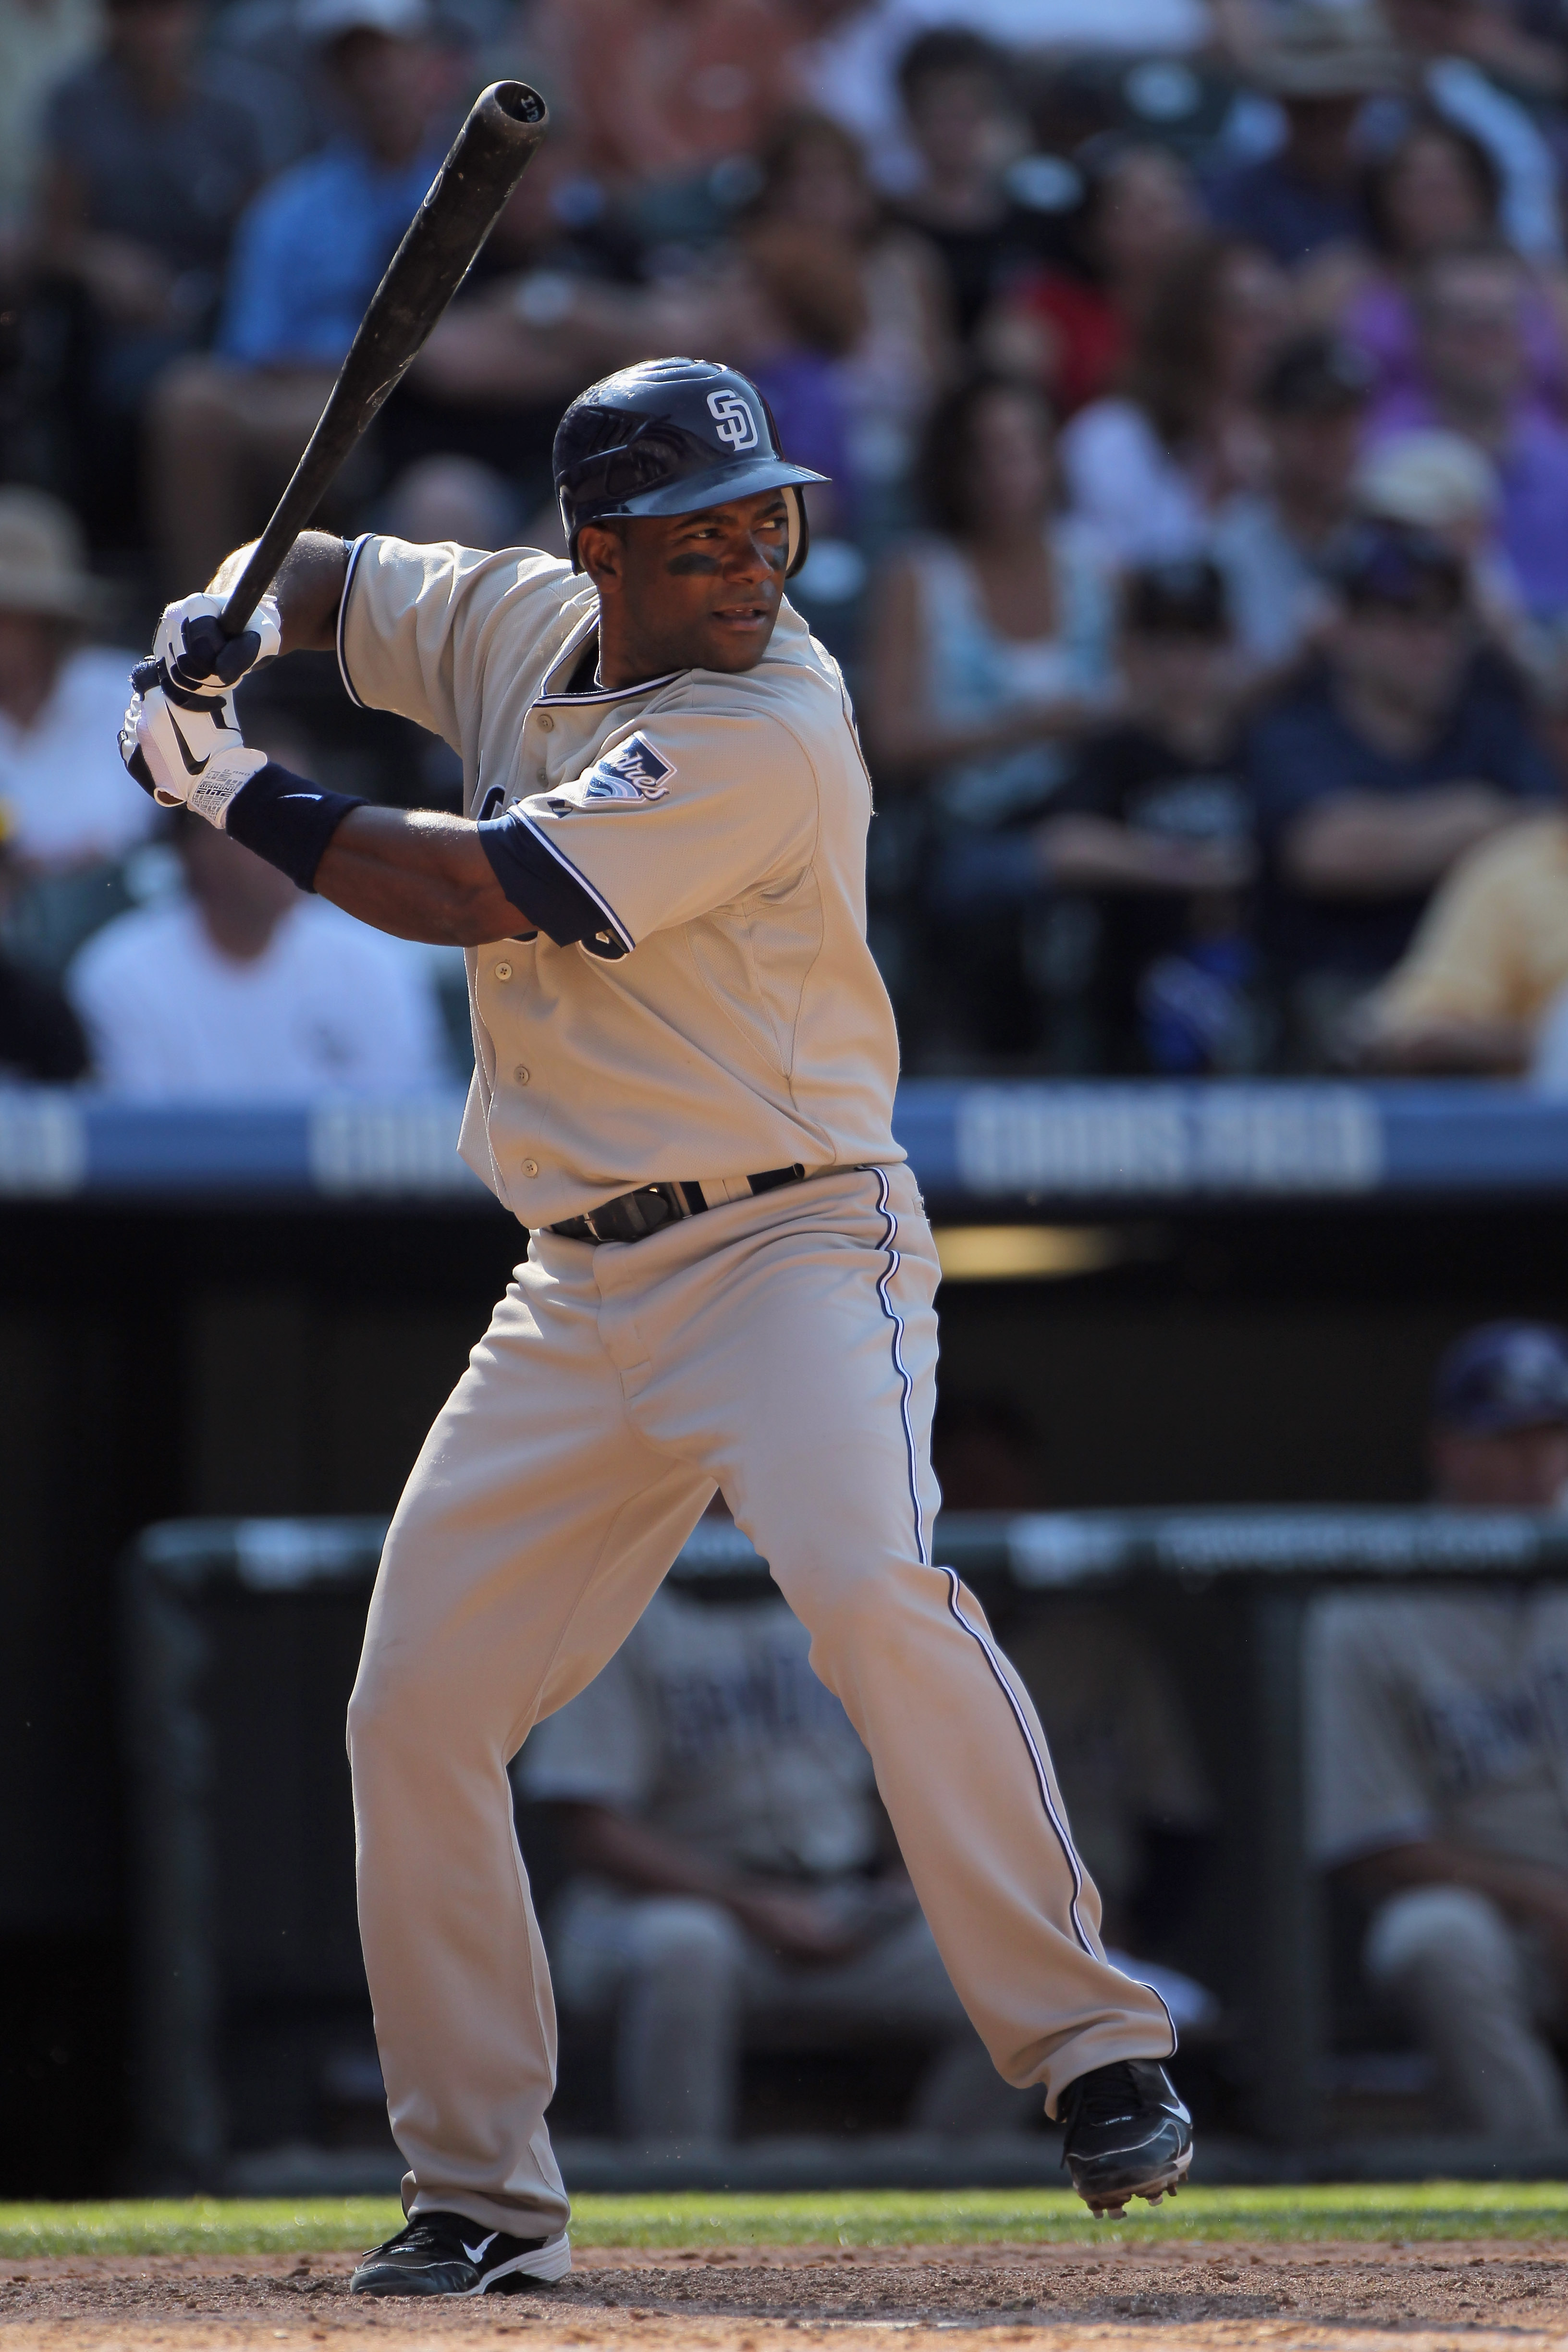 DENVER - SEPTEMBER 15:  Miguel Tejada #10 of the San Diego Padres takes an at bat against the Colorado Rockies at Coors Field on September 15, 2010 in Denver, Colorado. The Rockies defeated the Padres 9-6.  (Photo by Doug Pensinger/Getty Images)